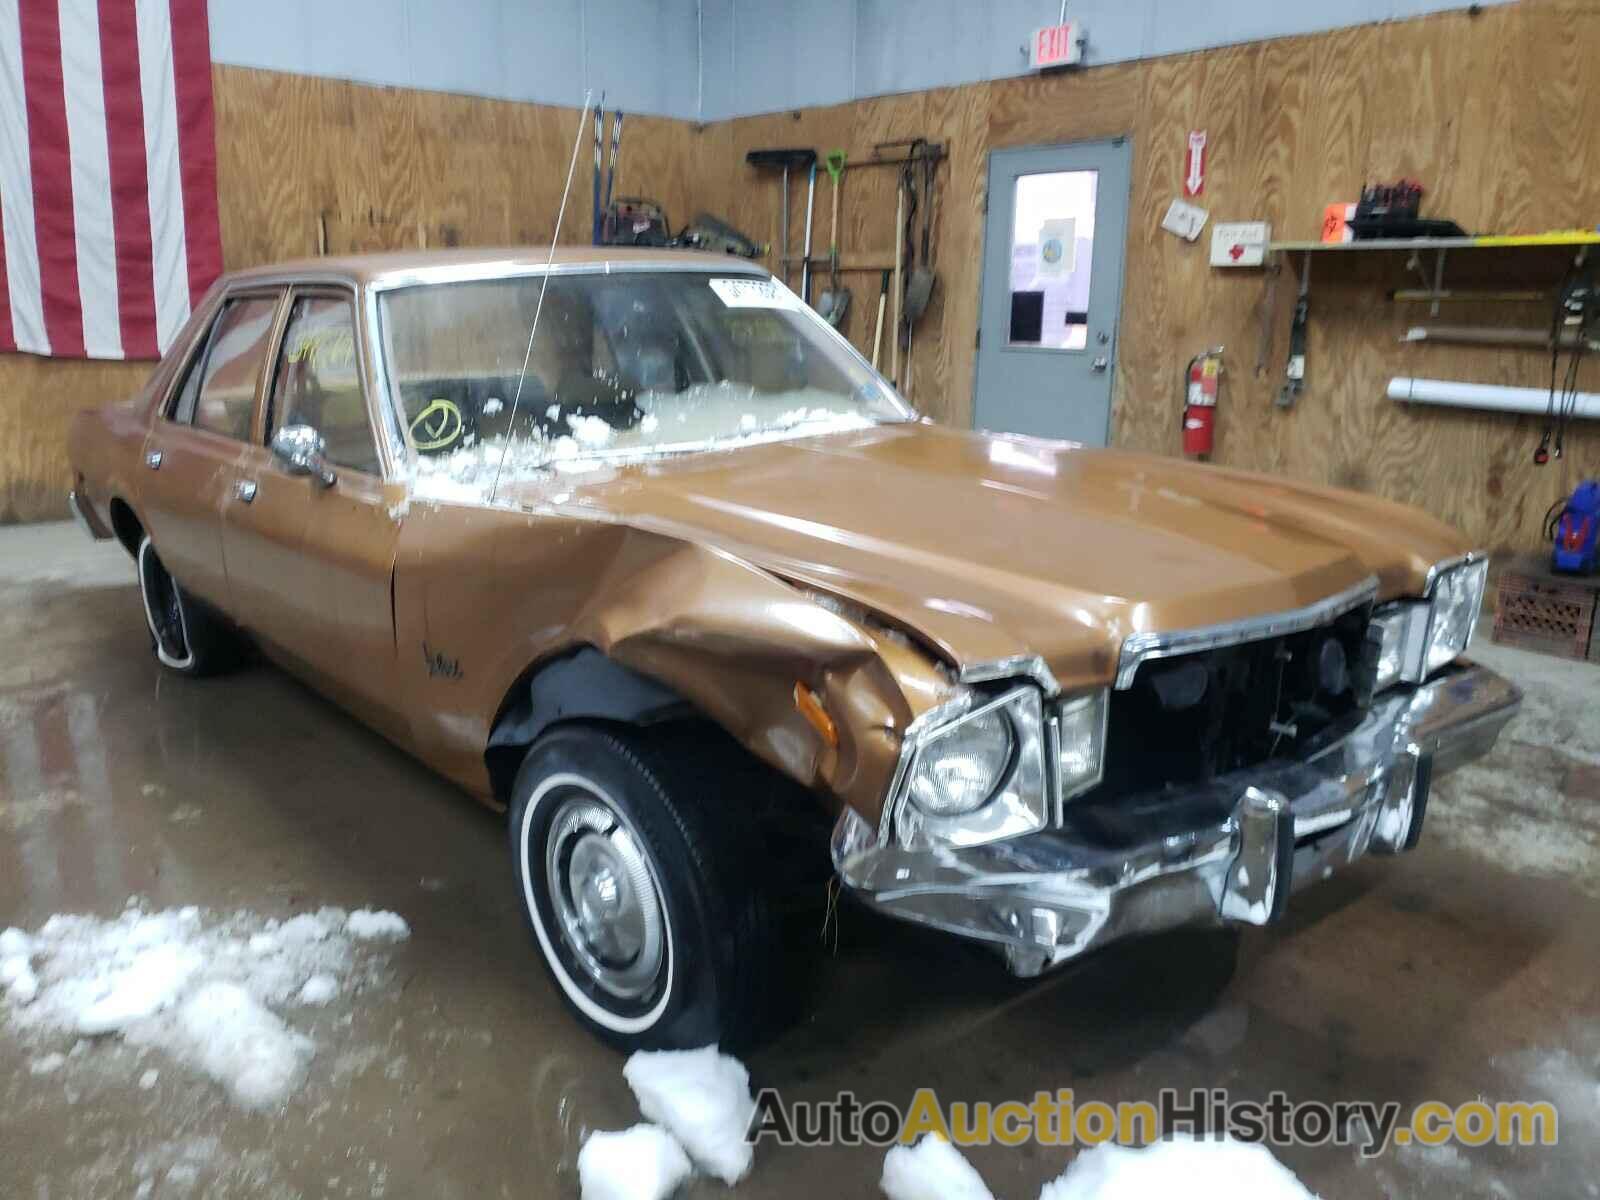 1979 PLYMOUTH ALL OTHER, HL41D9B187937